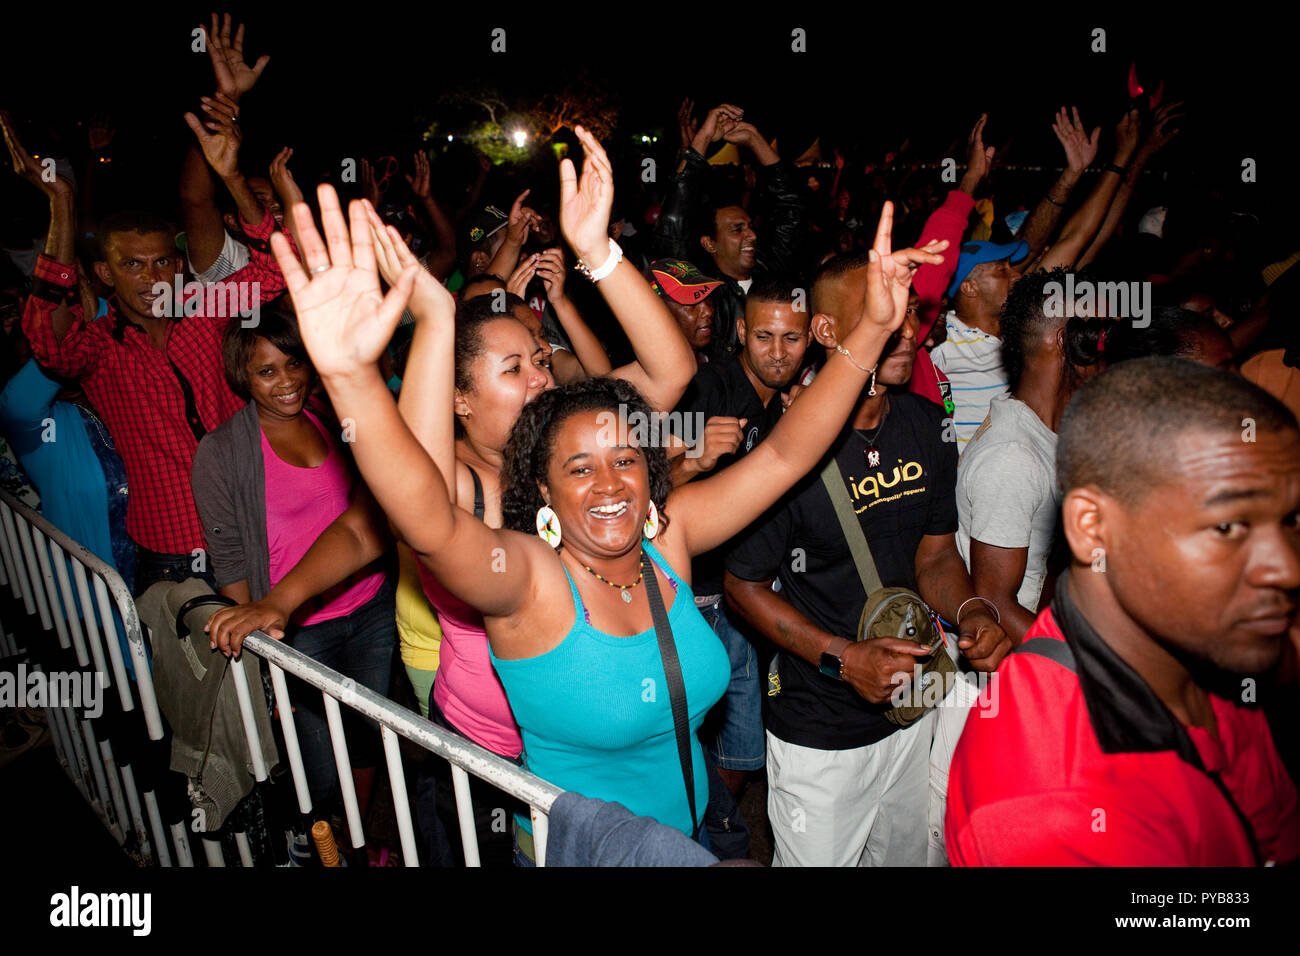 Festival crowd having fun at the 2013 Kreol Festival in Mauritius. Stock Photo